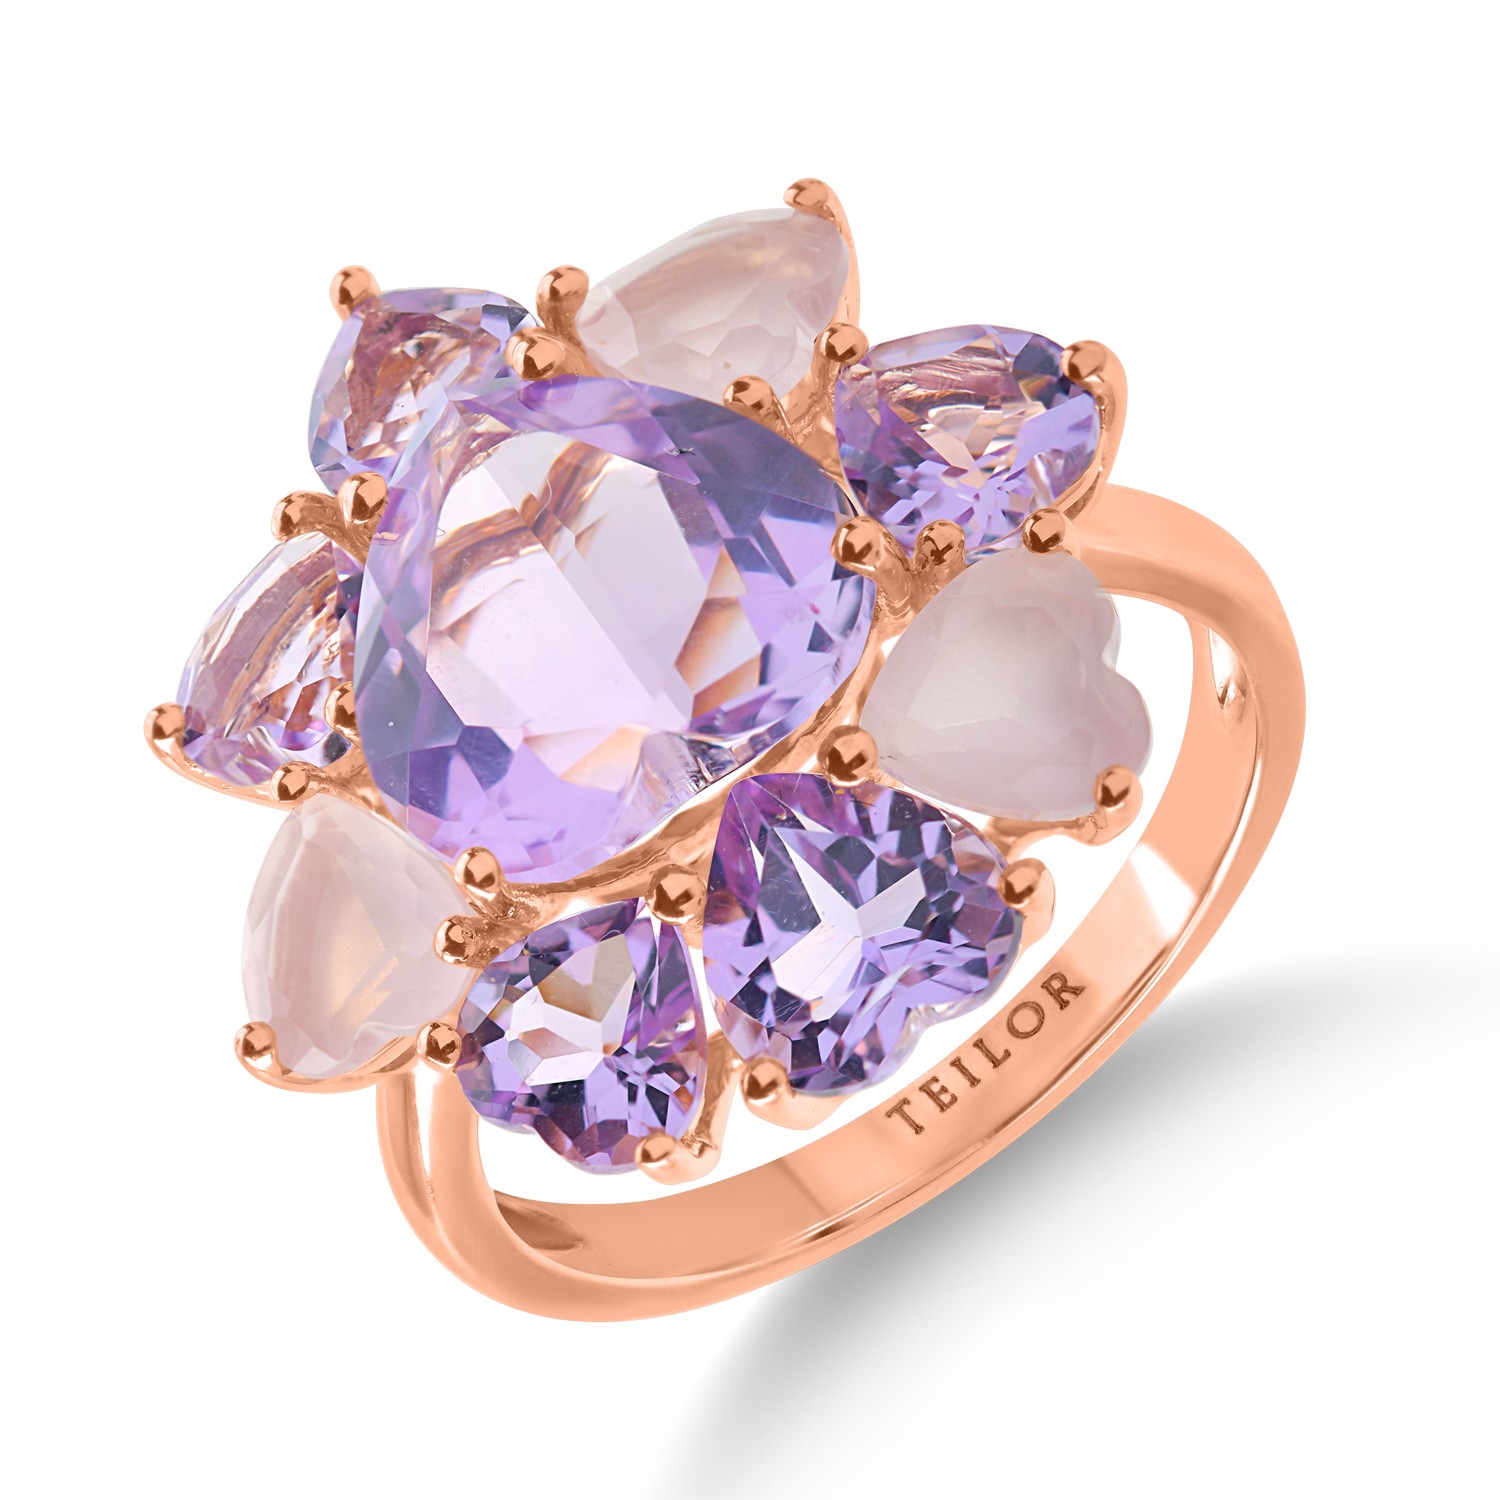 Rose gold ring with 7.6ct pink amethysts and rose quartz